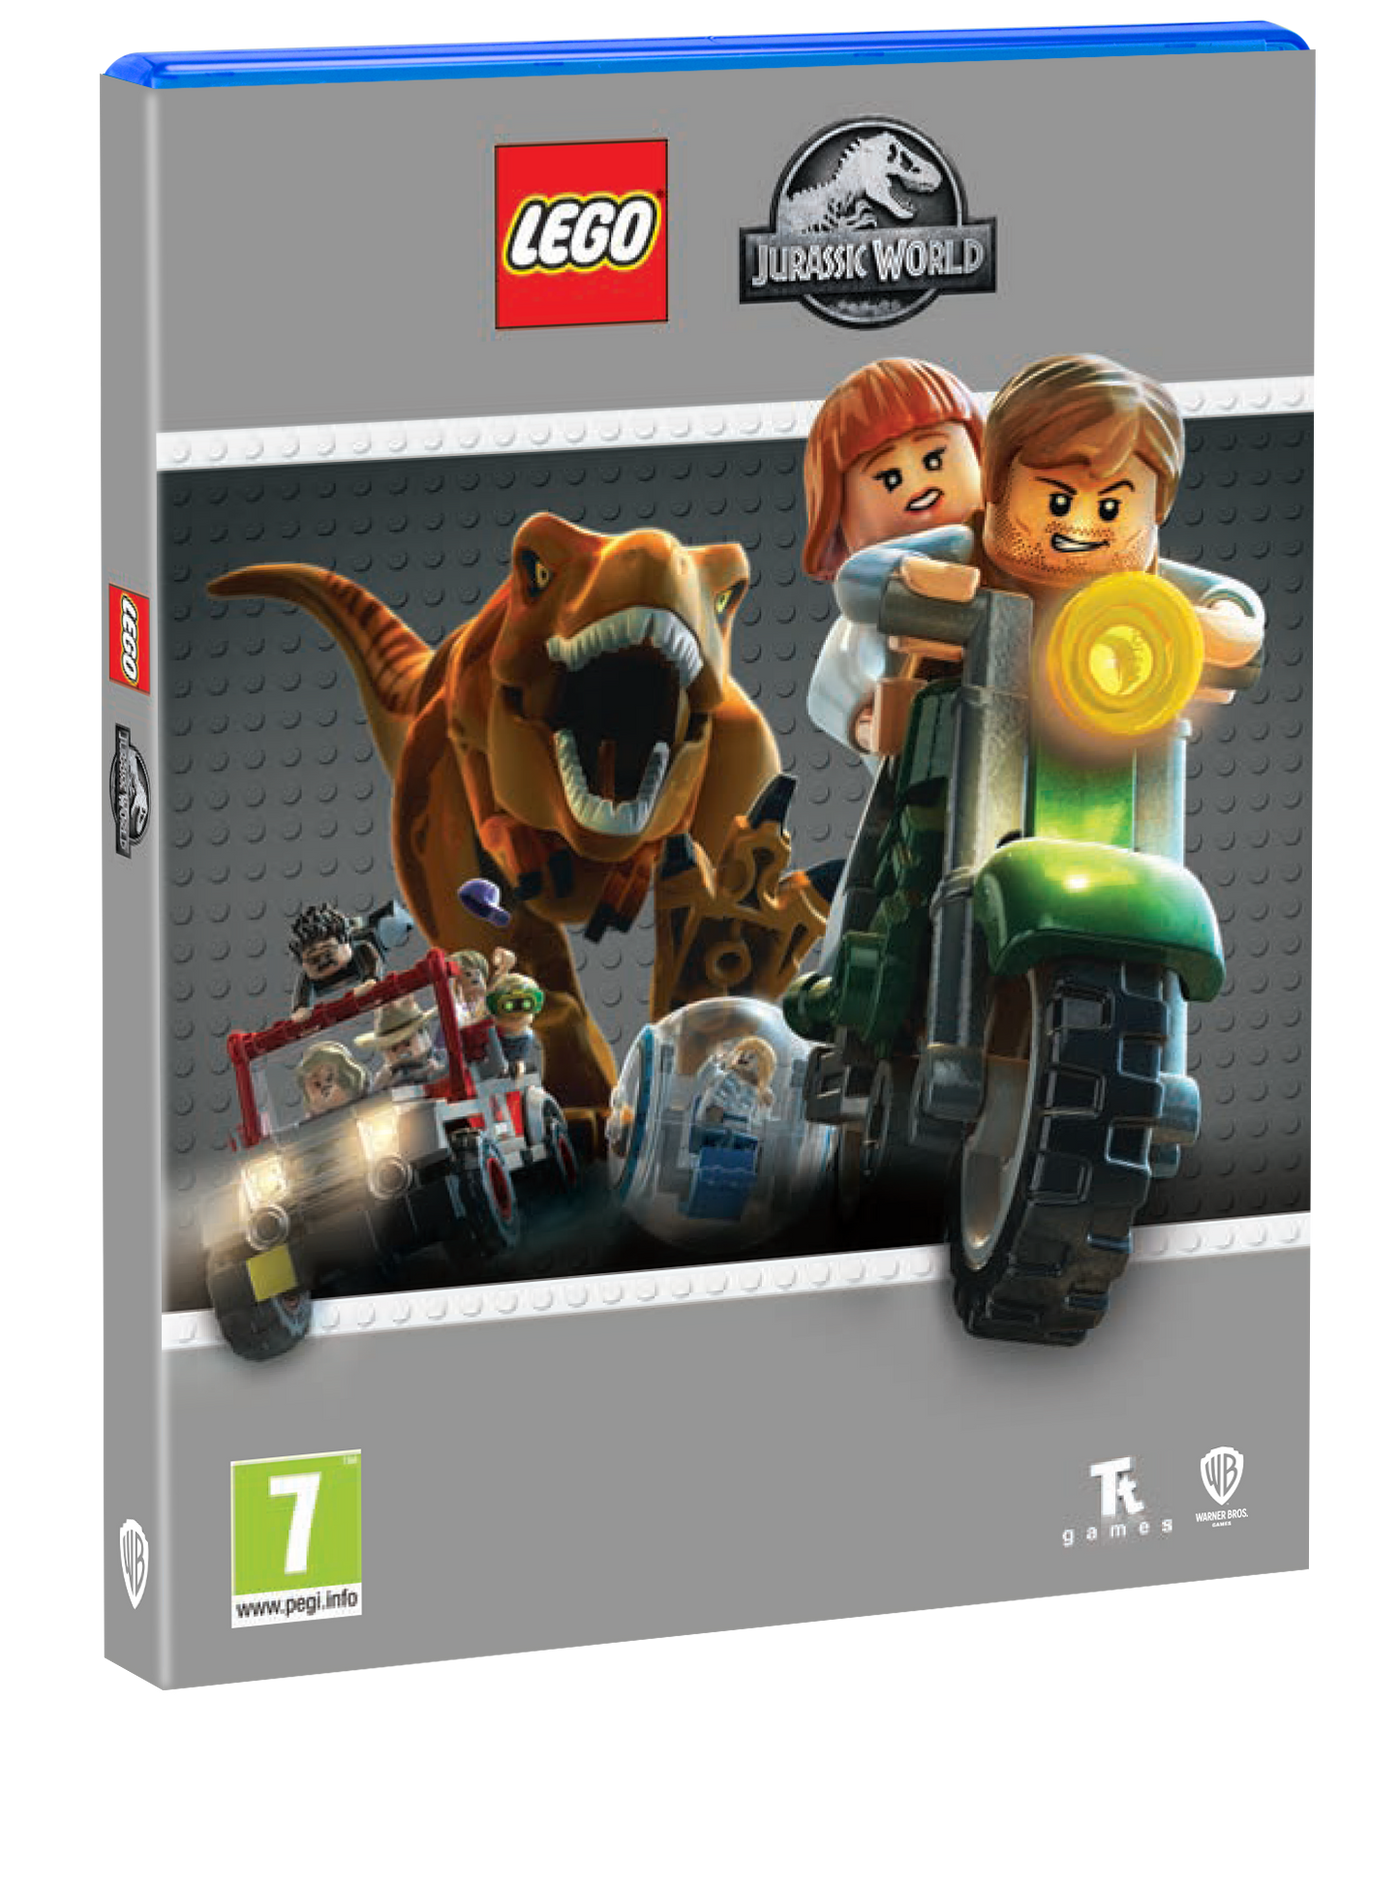 LEGO Jurassic World Video Game (PS4)